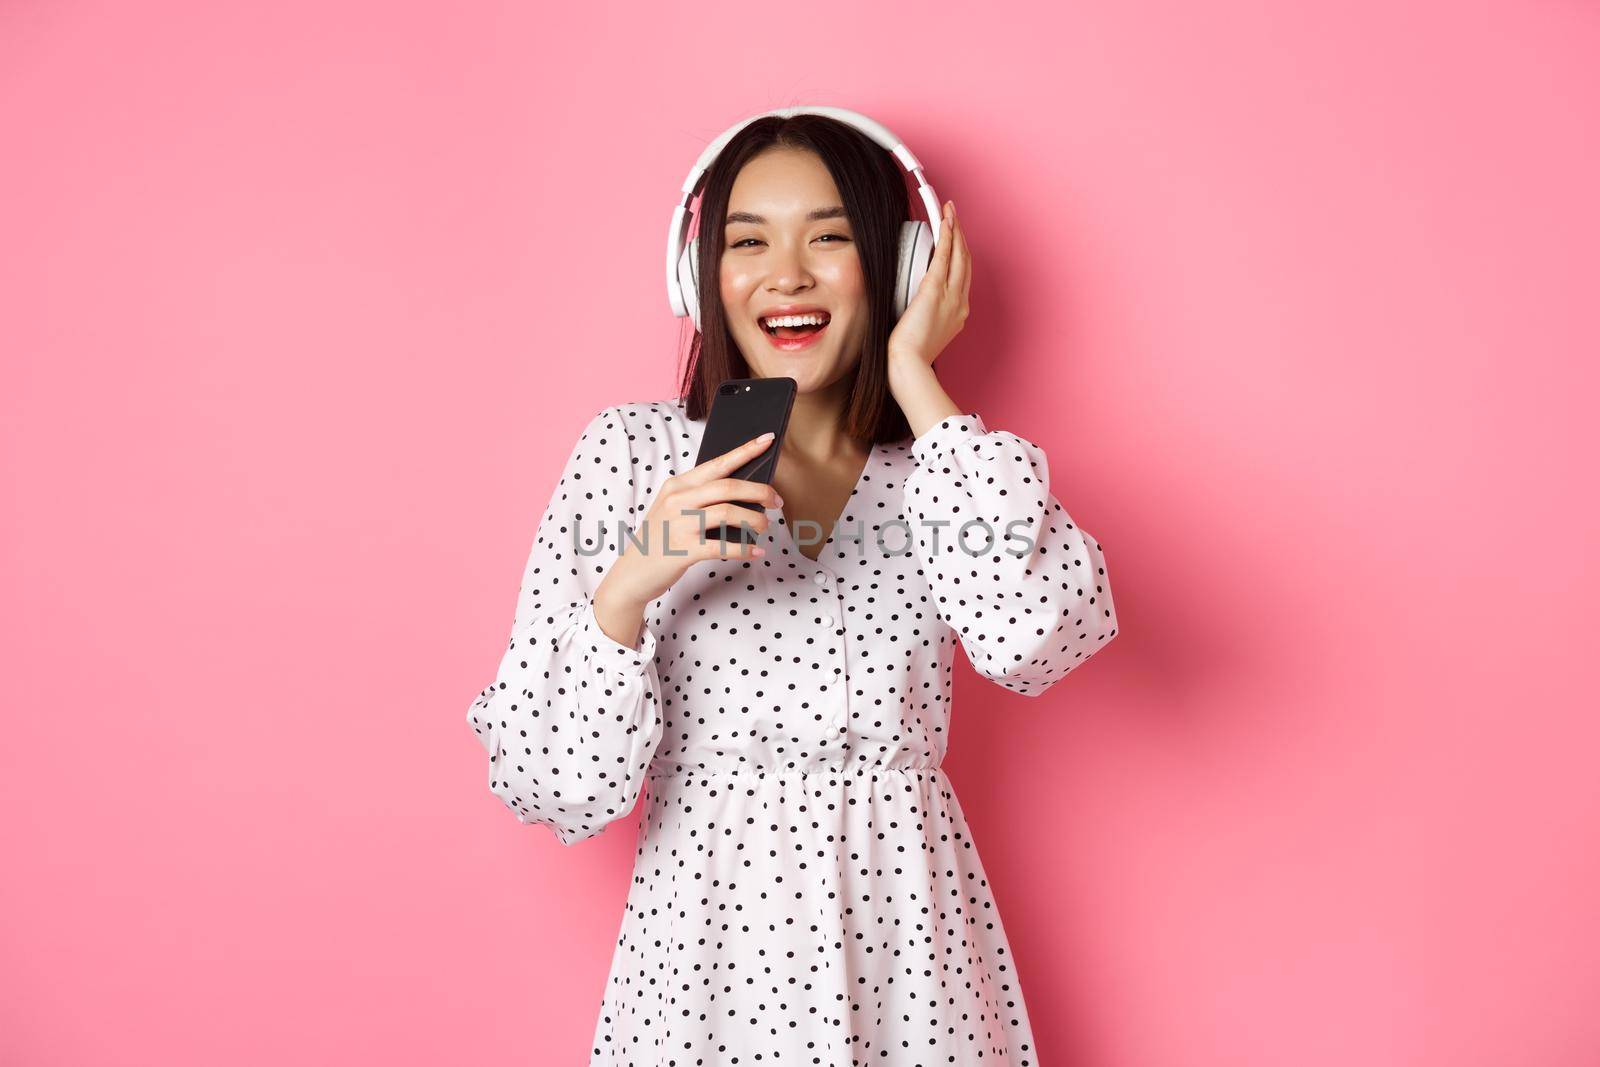 Beautiful smiling asian woman singing song in smartphone microphone, playing karaoke app and using headphones, standing over pink background.